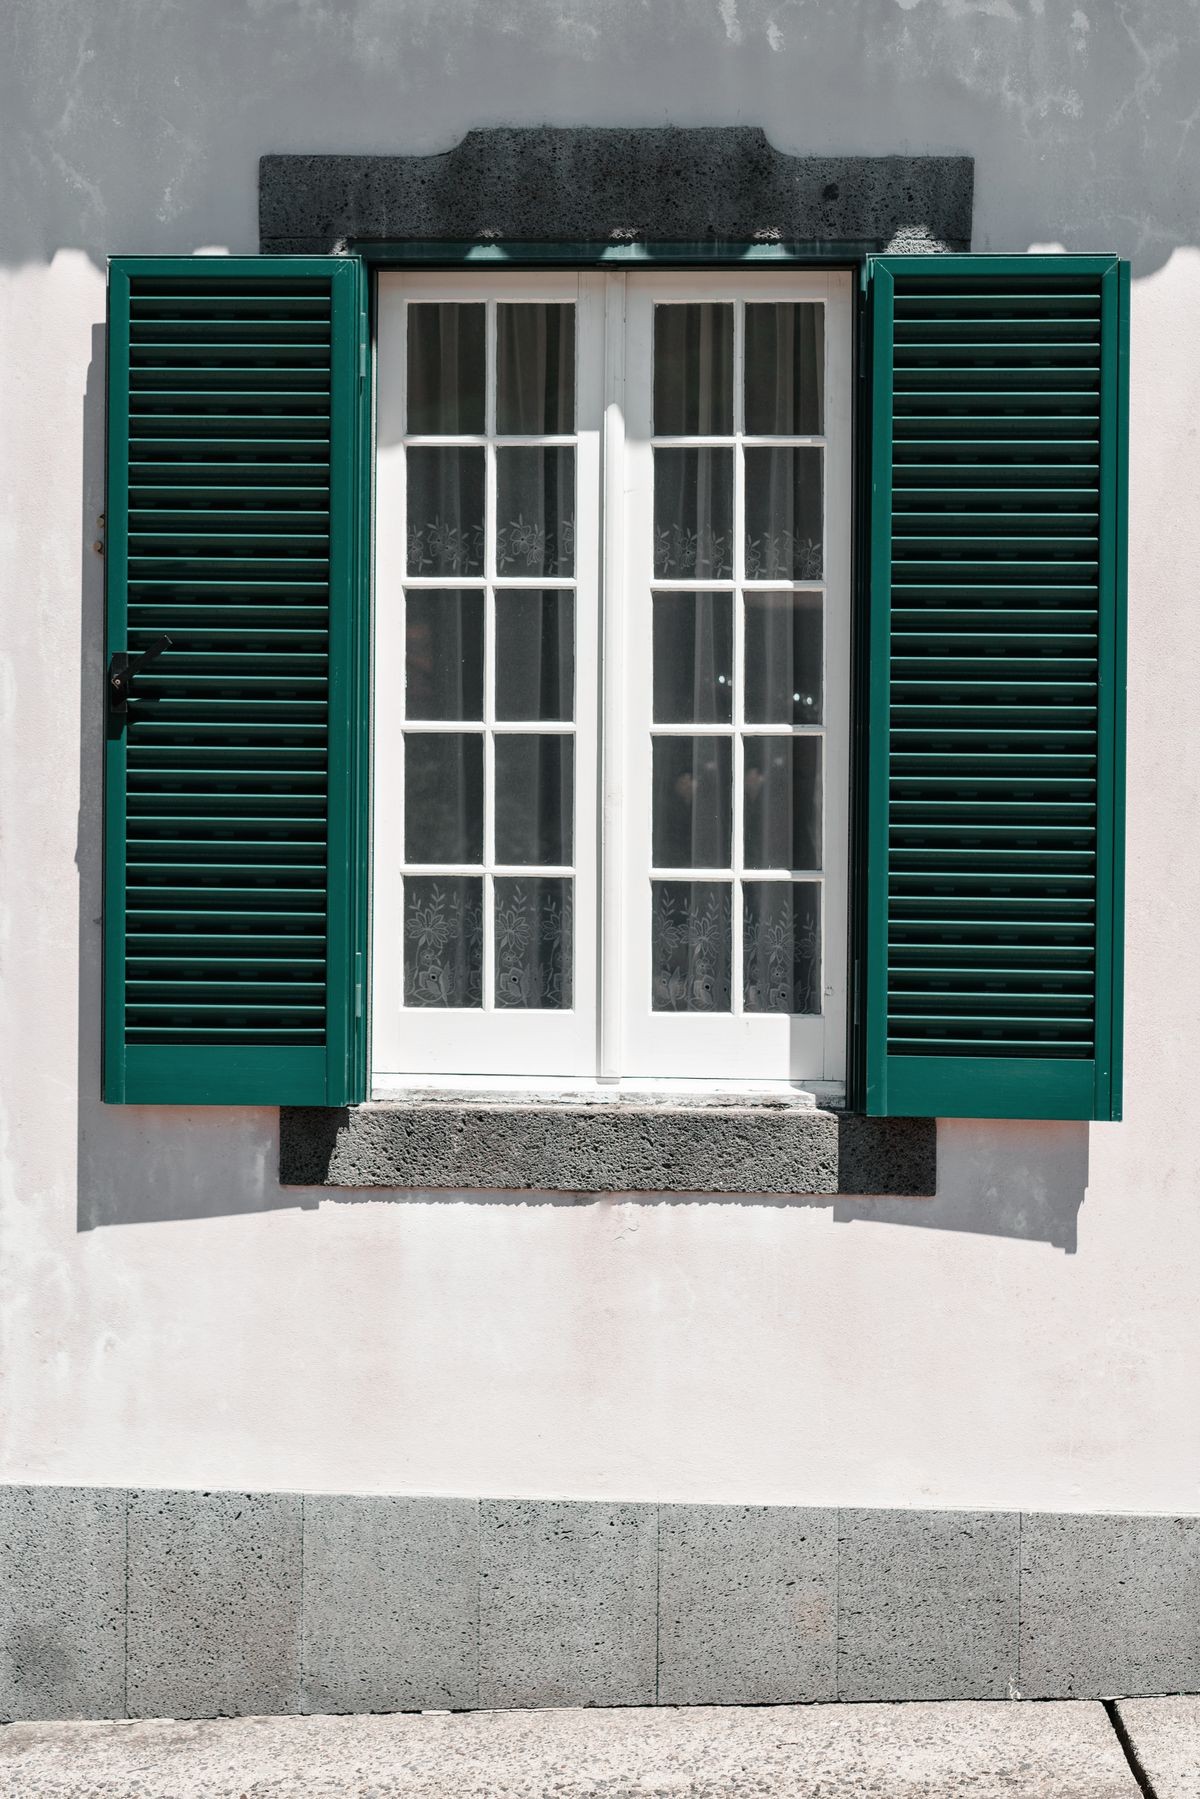 Ornamental facade of colorful house in Sao Miguel, Azores. Portugal. Beautiful old tiny houses, green doors and window shutters